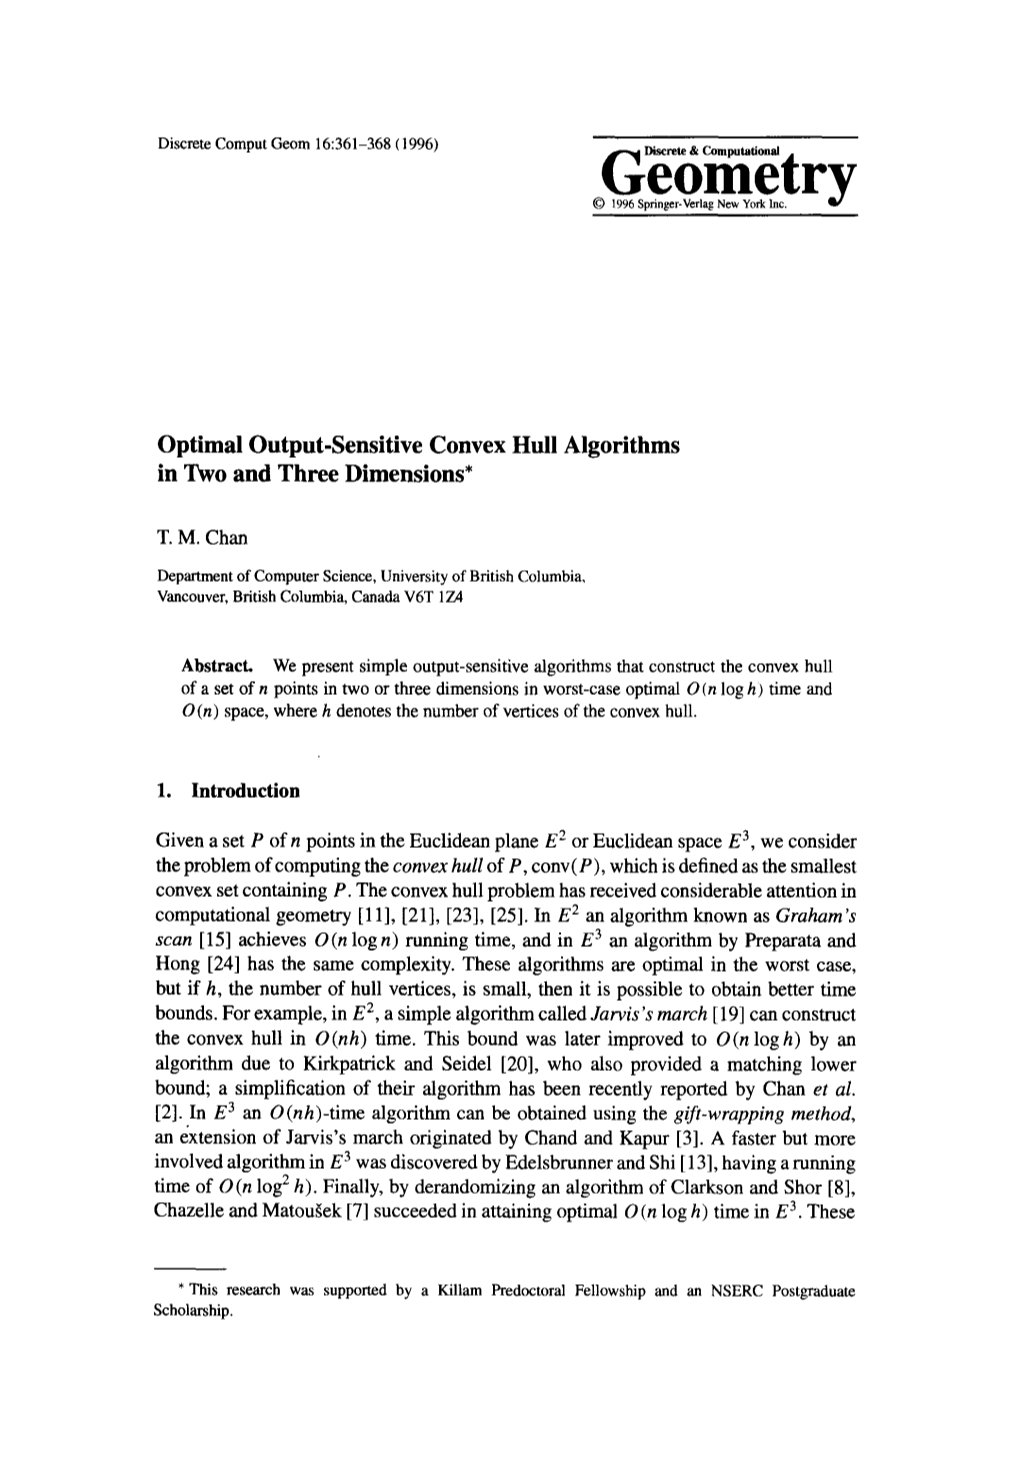 Optimal Output-Sensitive Convex Hull Algorithms in Two and Three Dimensions*